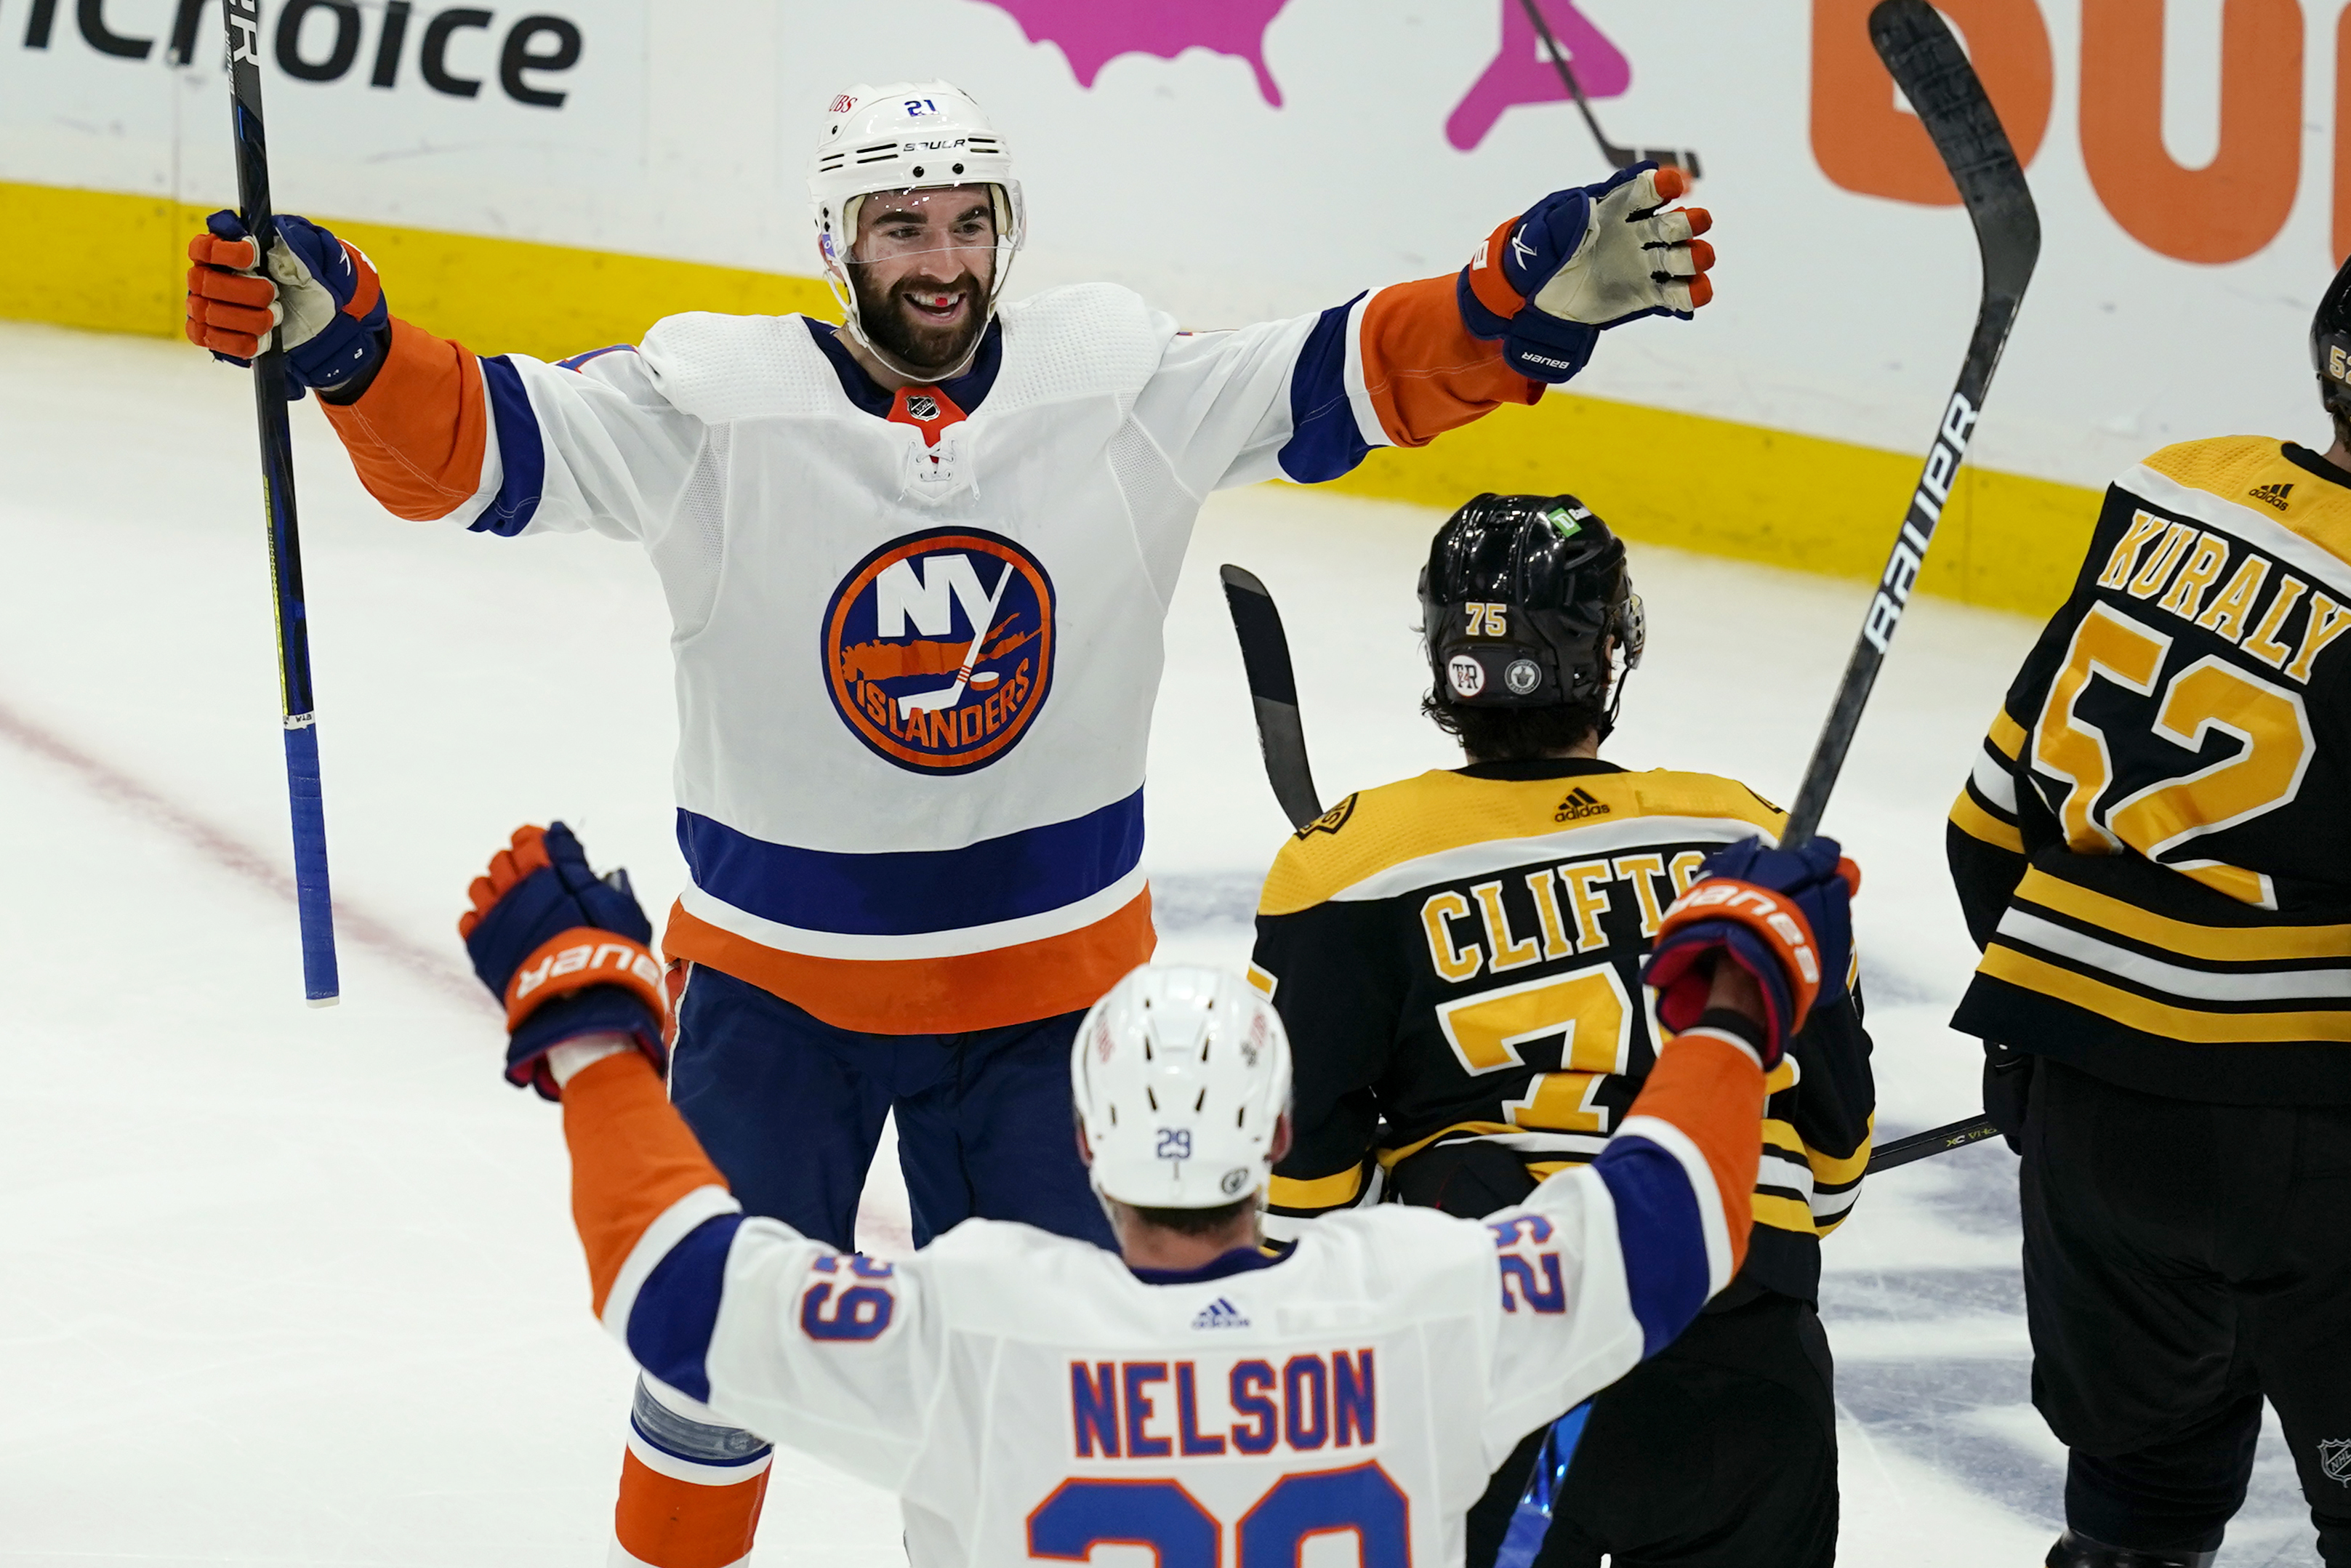 Boston Bruins Vs New York Islanders Free Live Stream Game 6 6 9 21 Watch Nhl Stanley Cup Playoffs Round 2 Online Time Tv Channel Nj Com